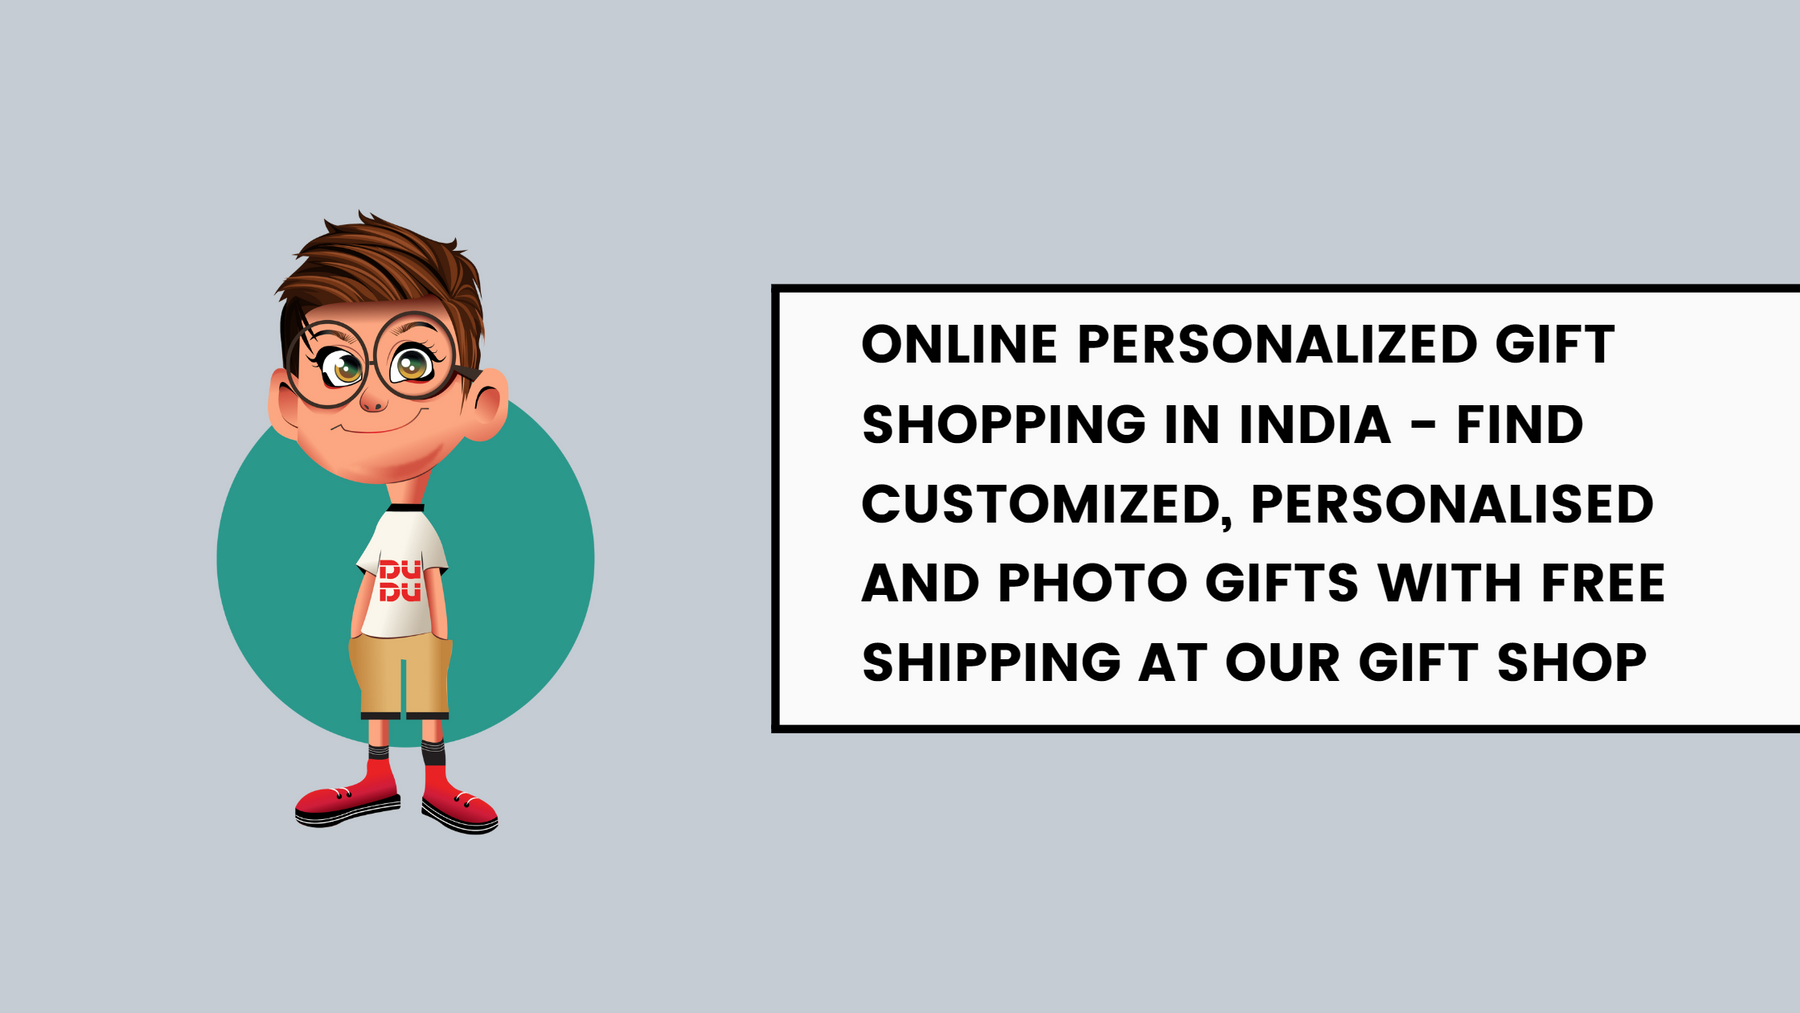 Online Personalized Gift Shopping in India - Find Customized, Personalised and Photo Gifts with Free Shipping at Our Gift Shop